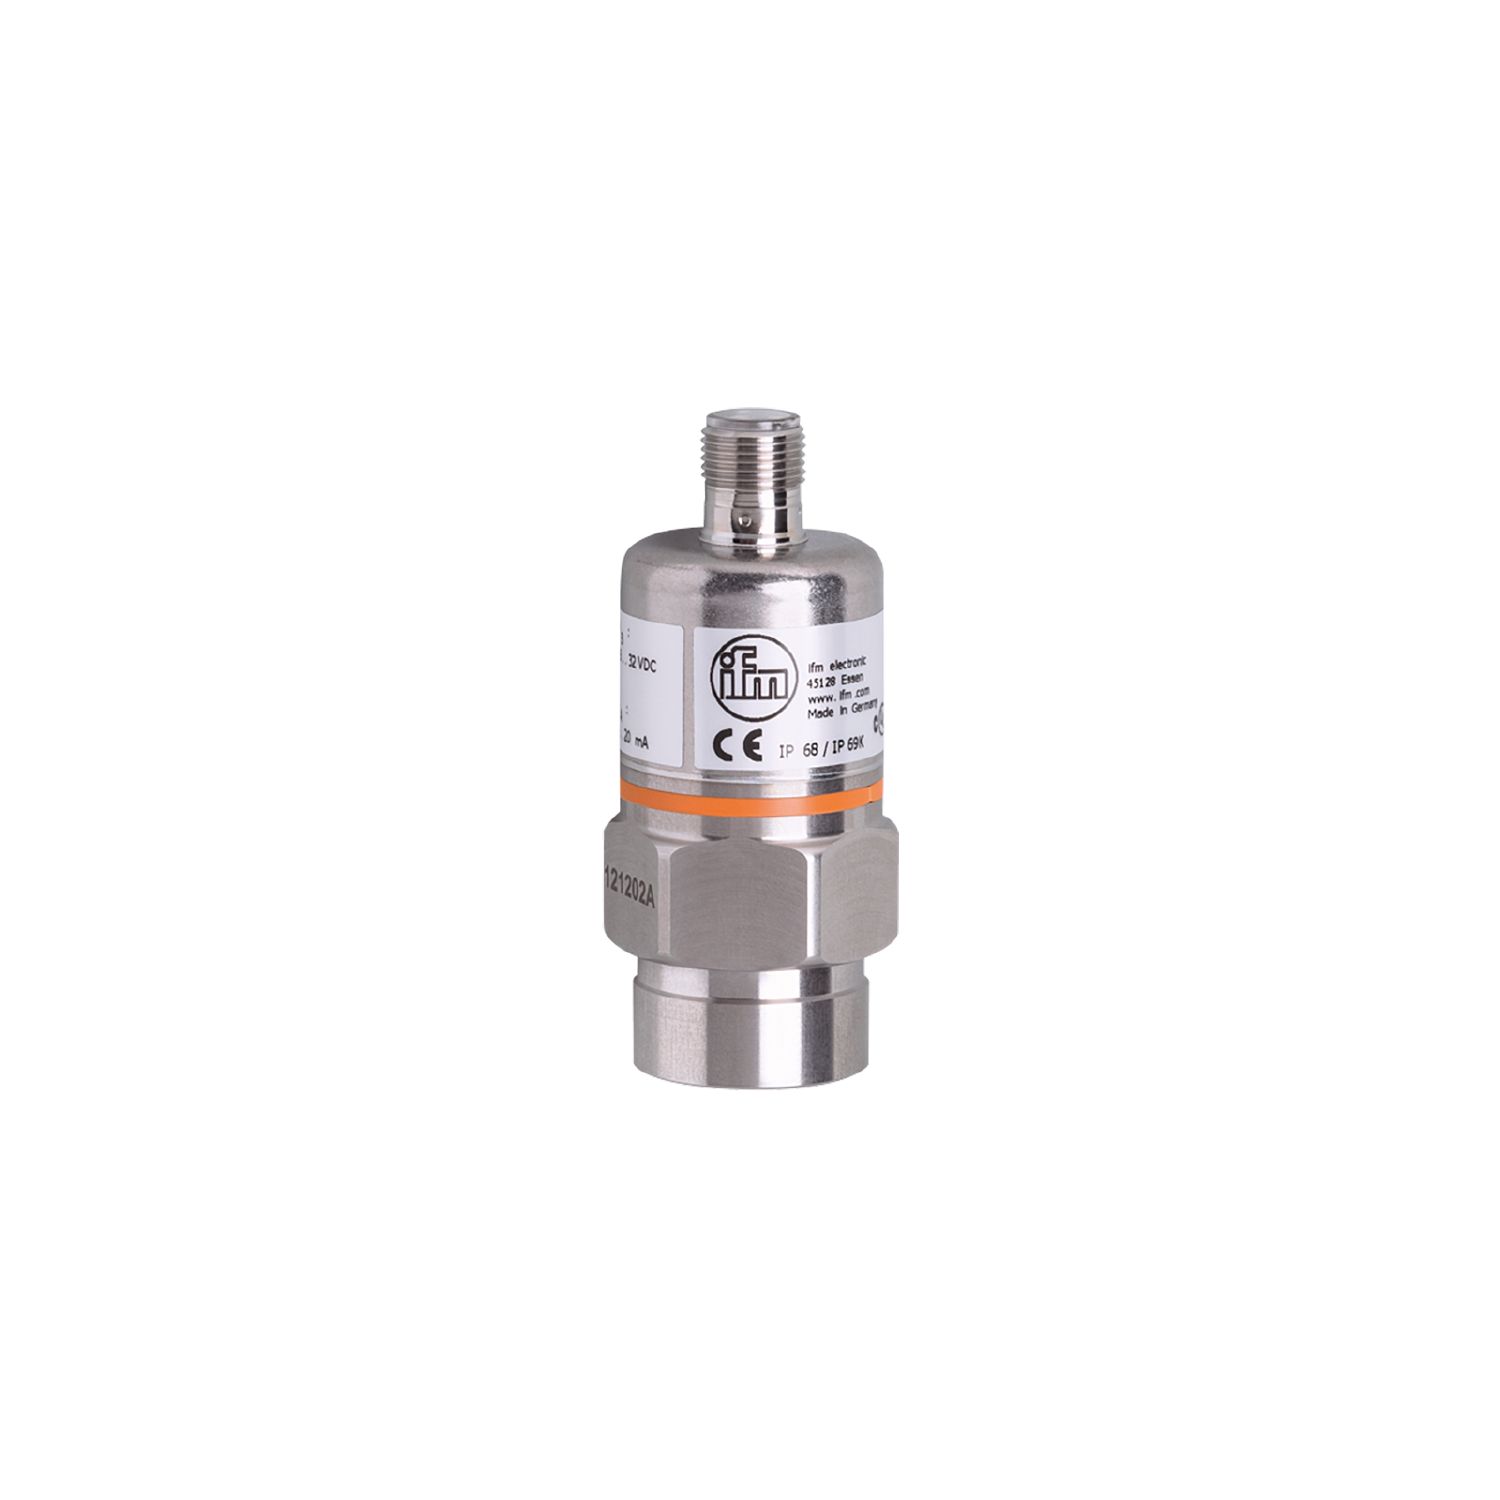 PA9028 - Pressure transmitter with ceramic measuring cell - ifm